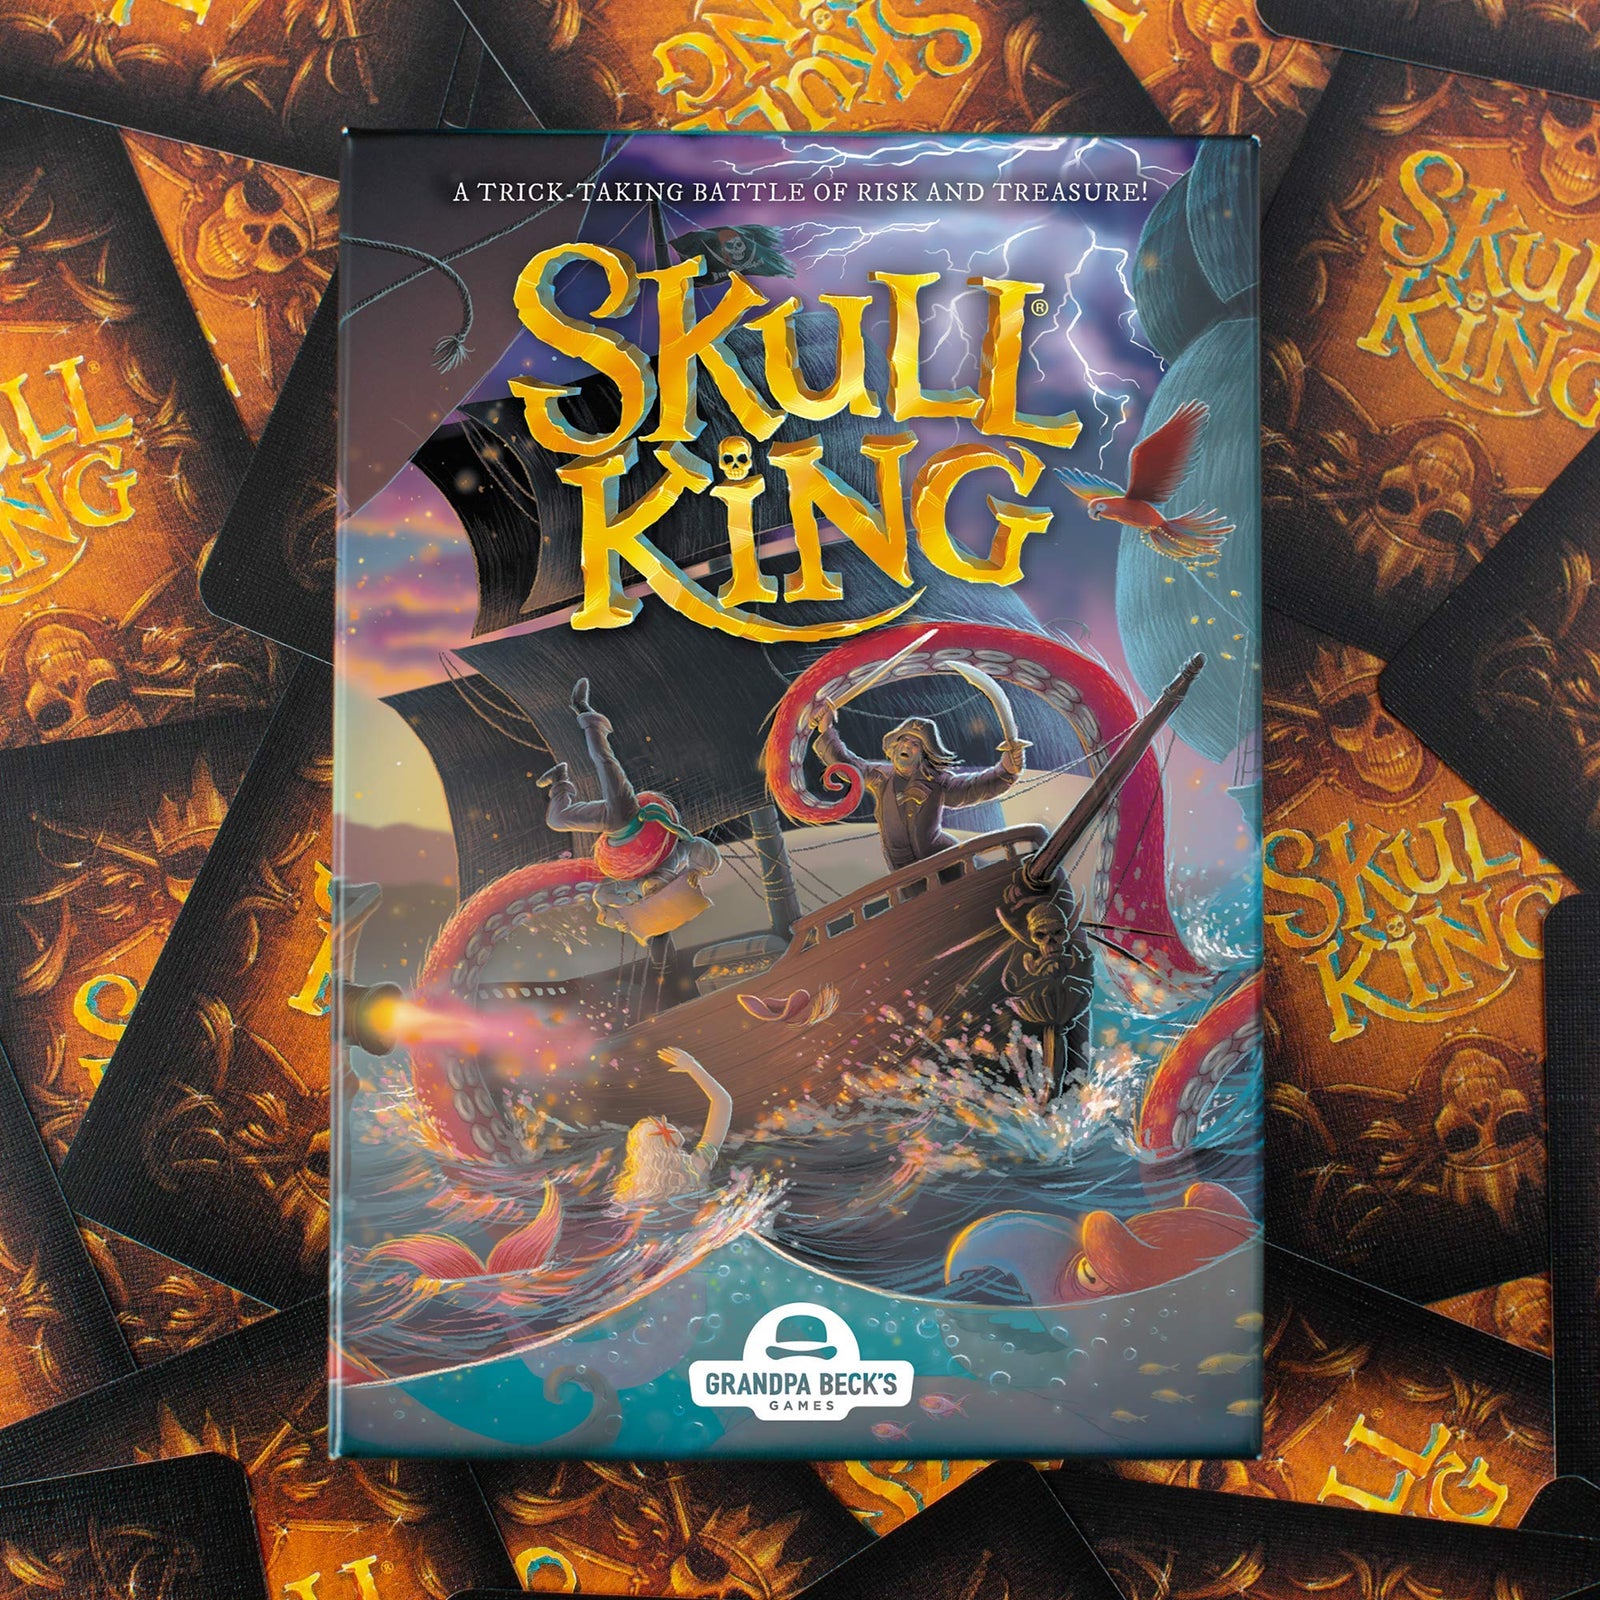 Skull King - The Ultimate Pirate Trick Taking Game | from The Creators of Cover Your Assets & Cover Your Kingdom | 2-8 Players 8+